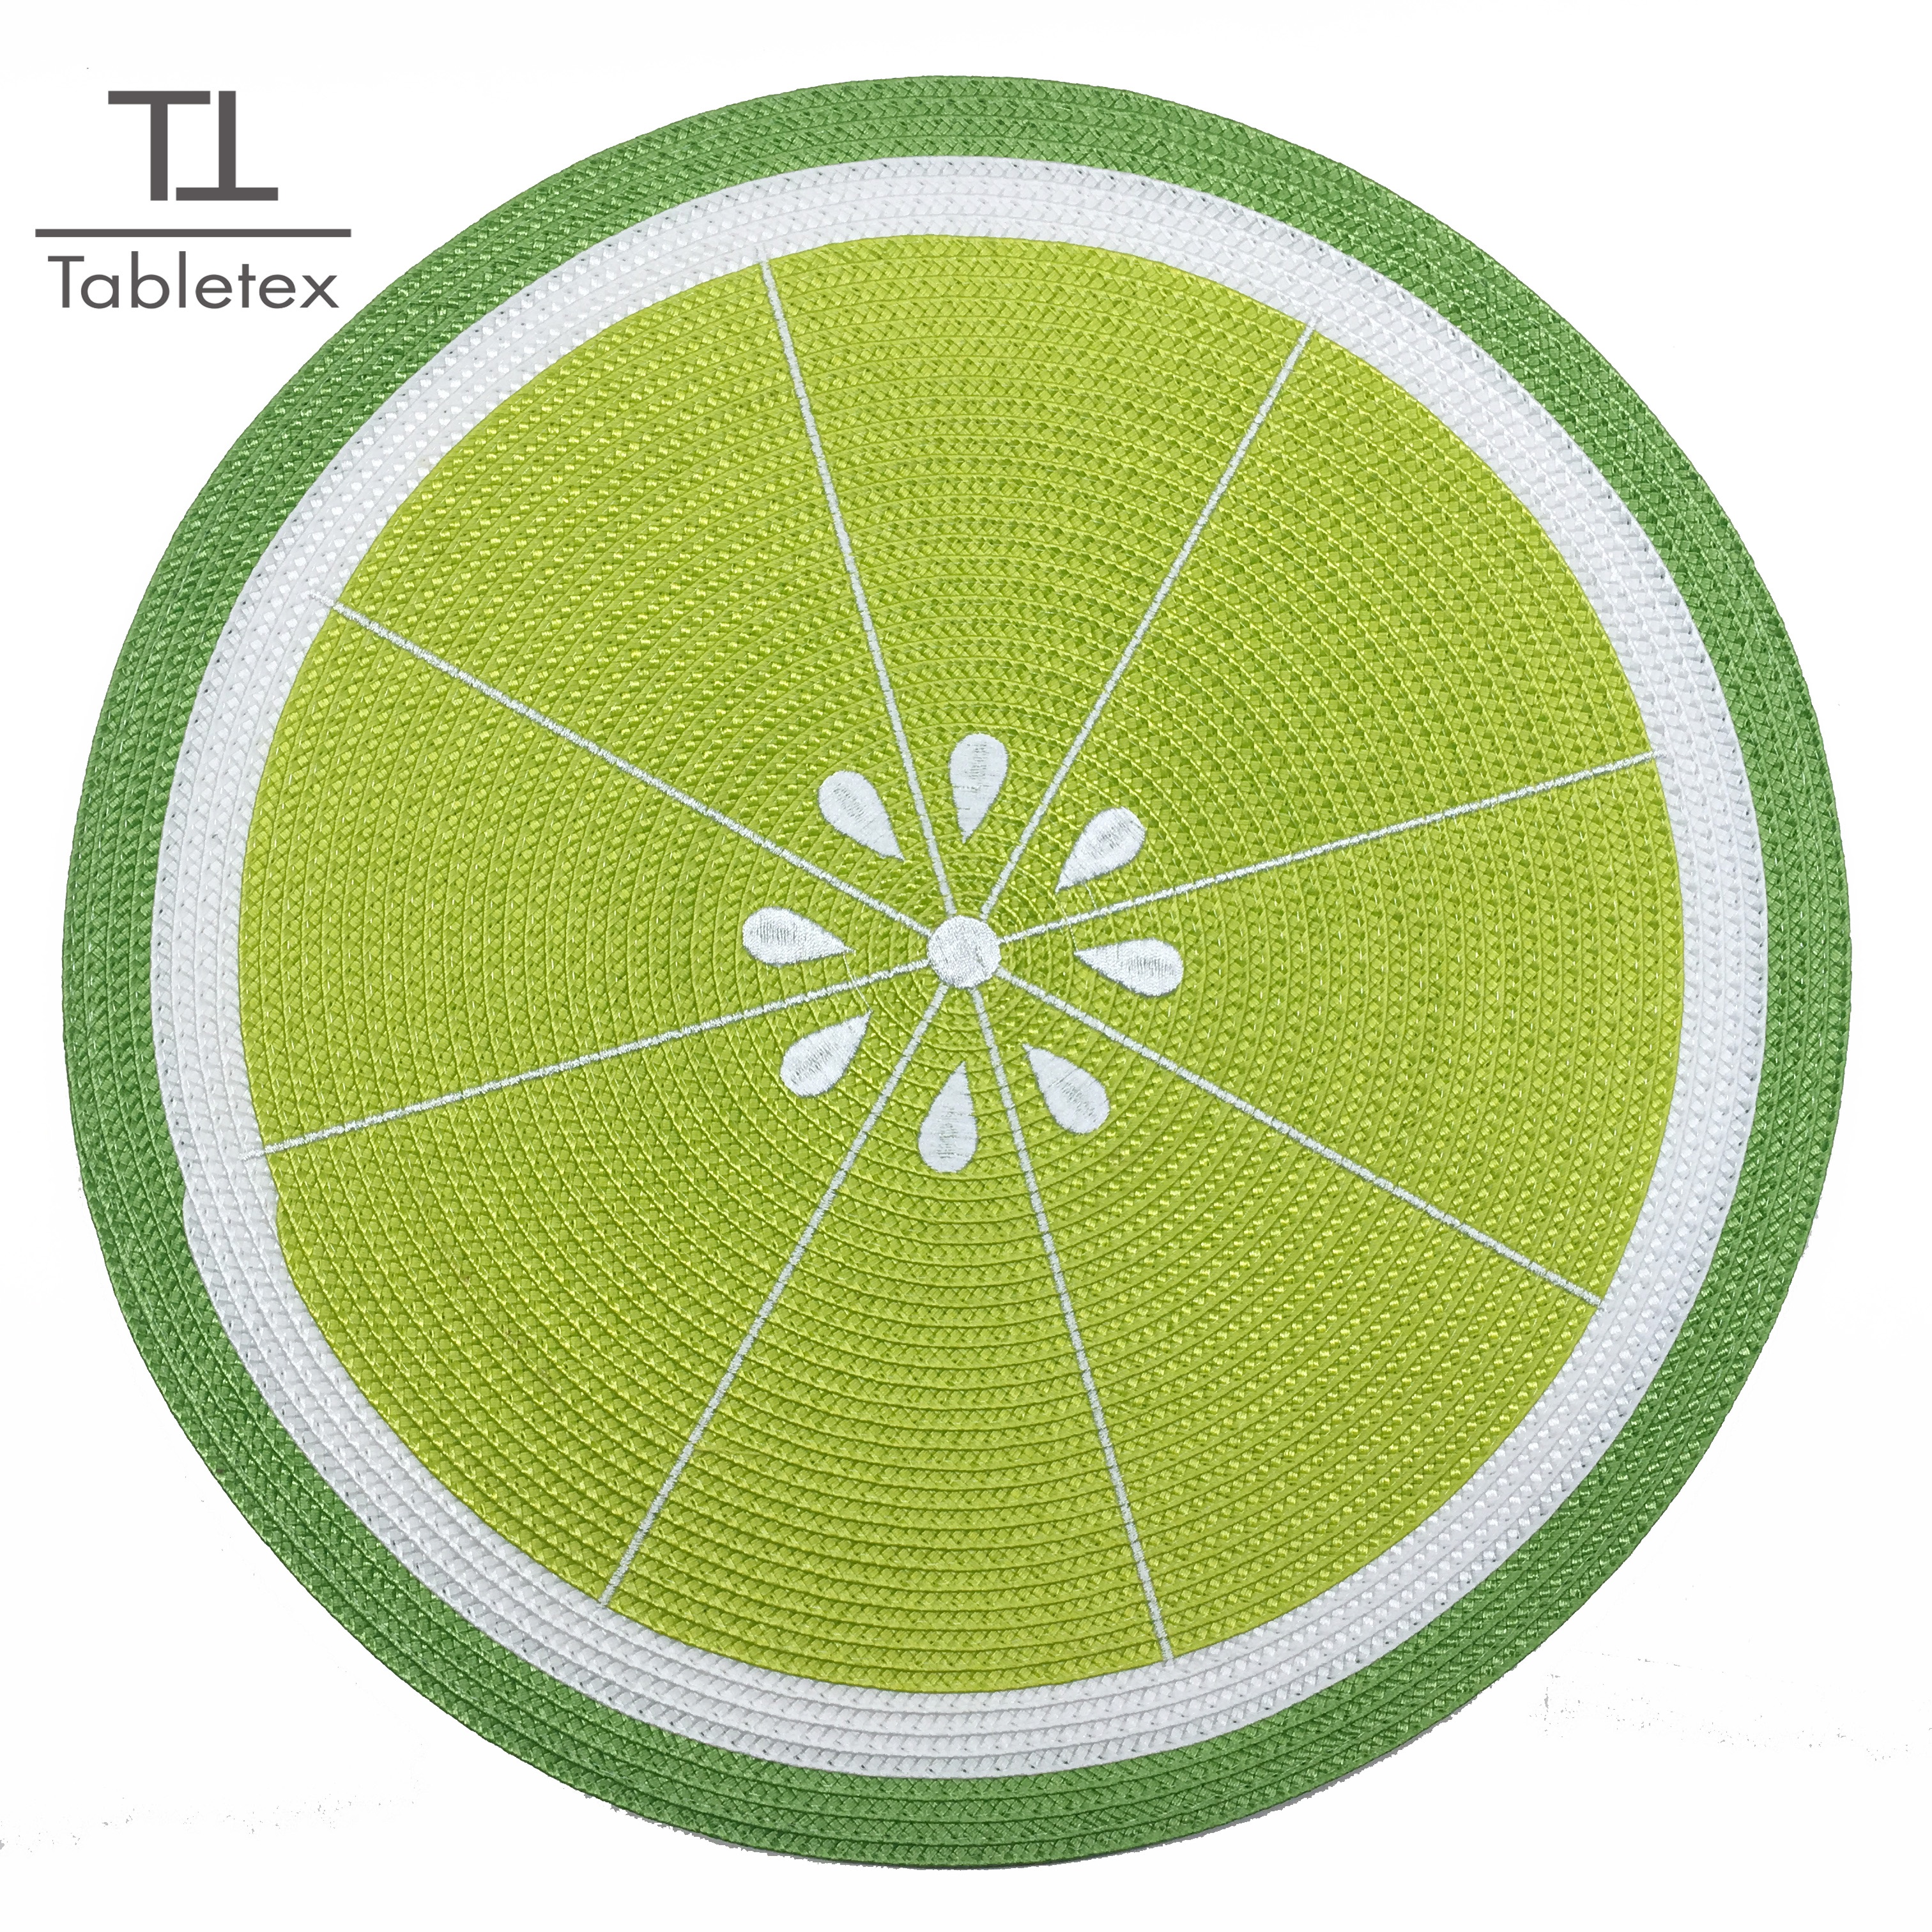 Tabletex lemon style embroidered  placemat polypropylene woven placemat watermelon mat